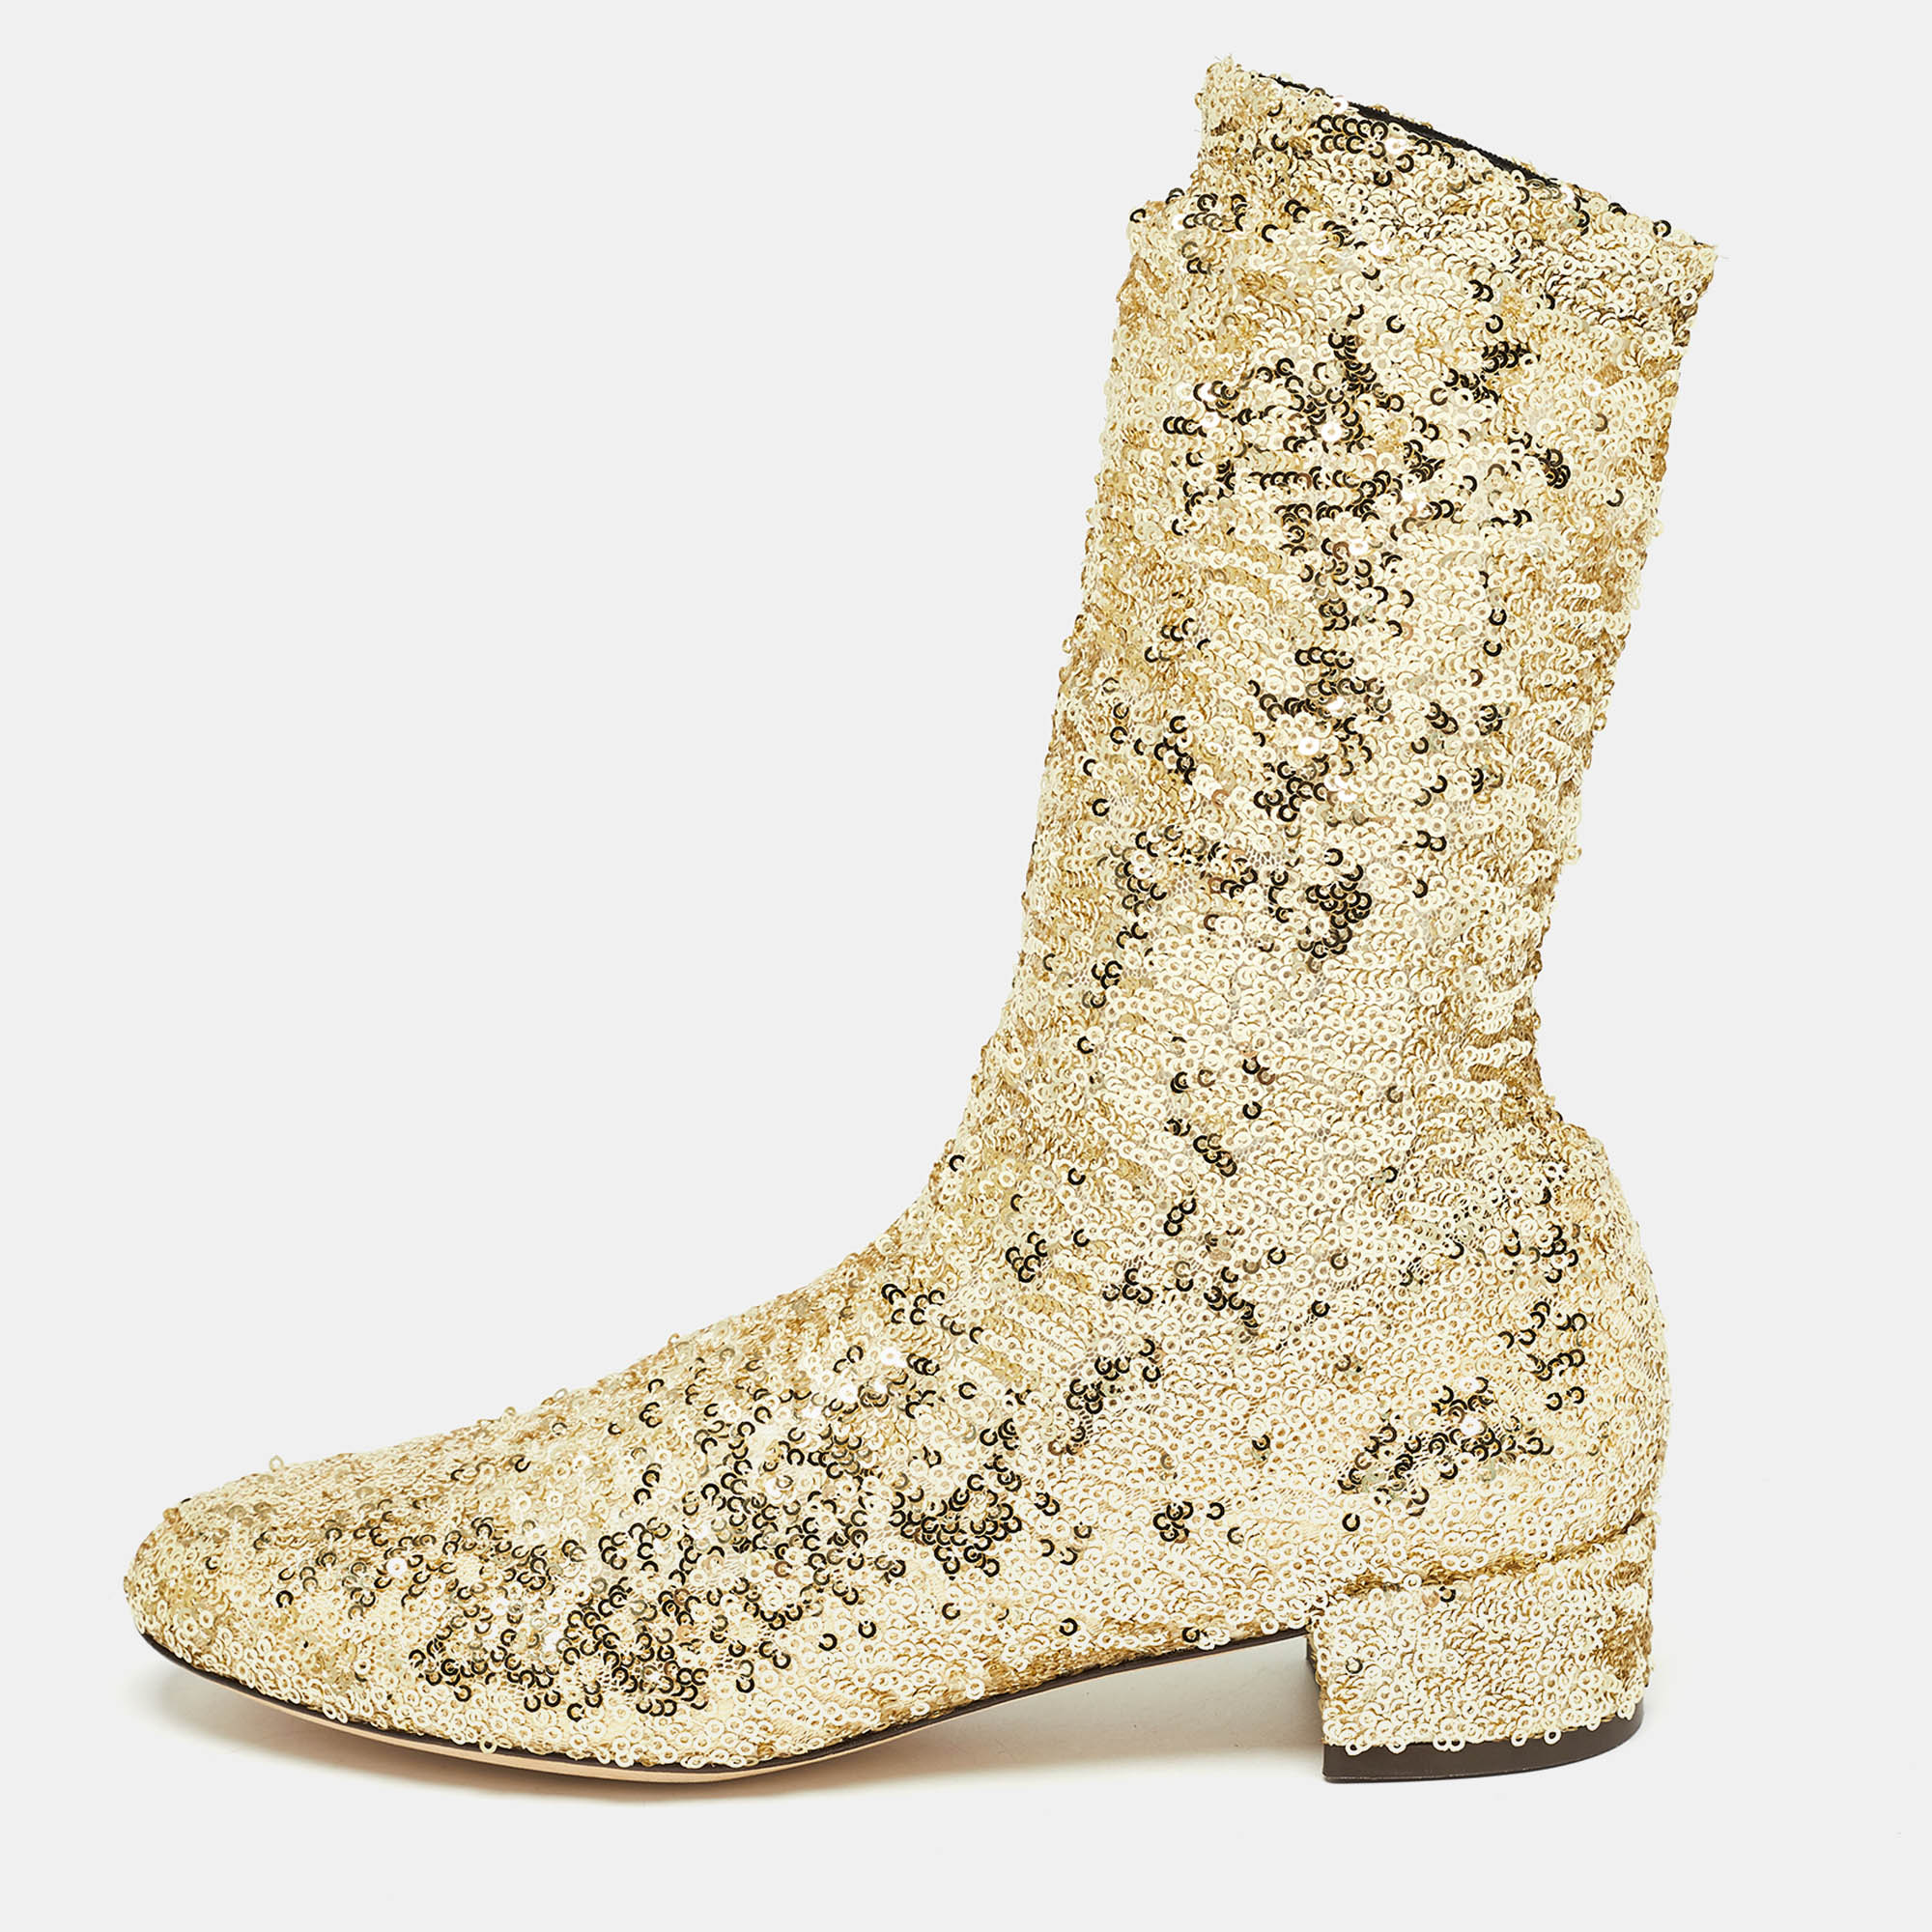 Dolce & gabbana gold sequins and mesh boots size 36